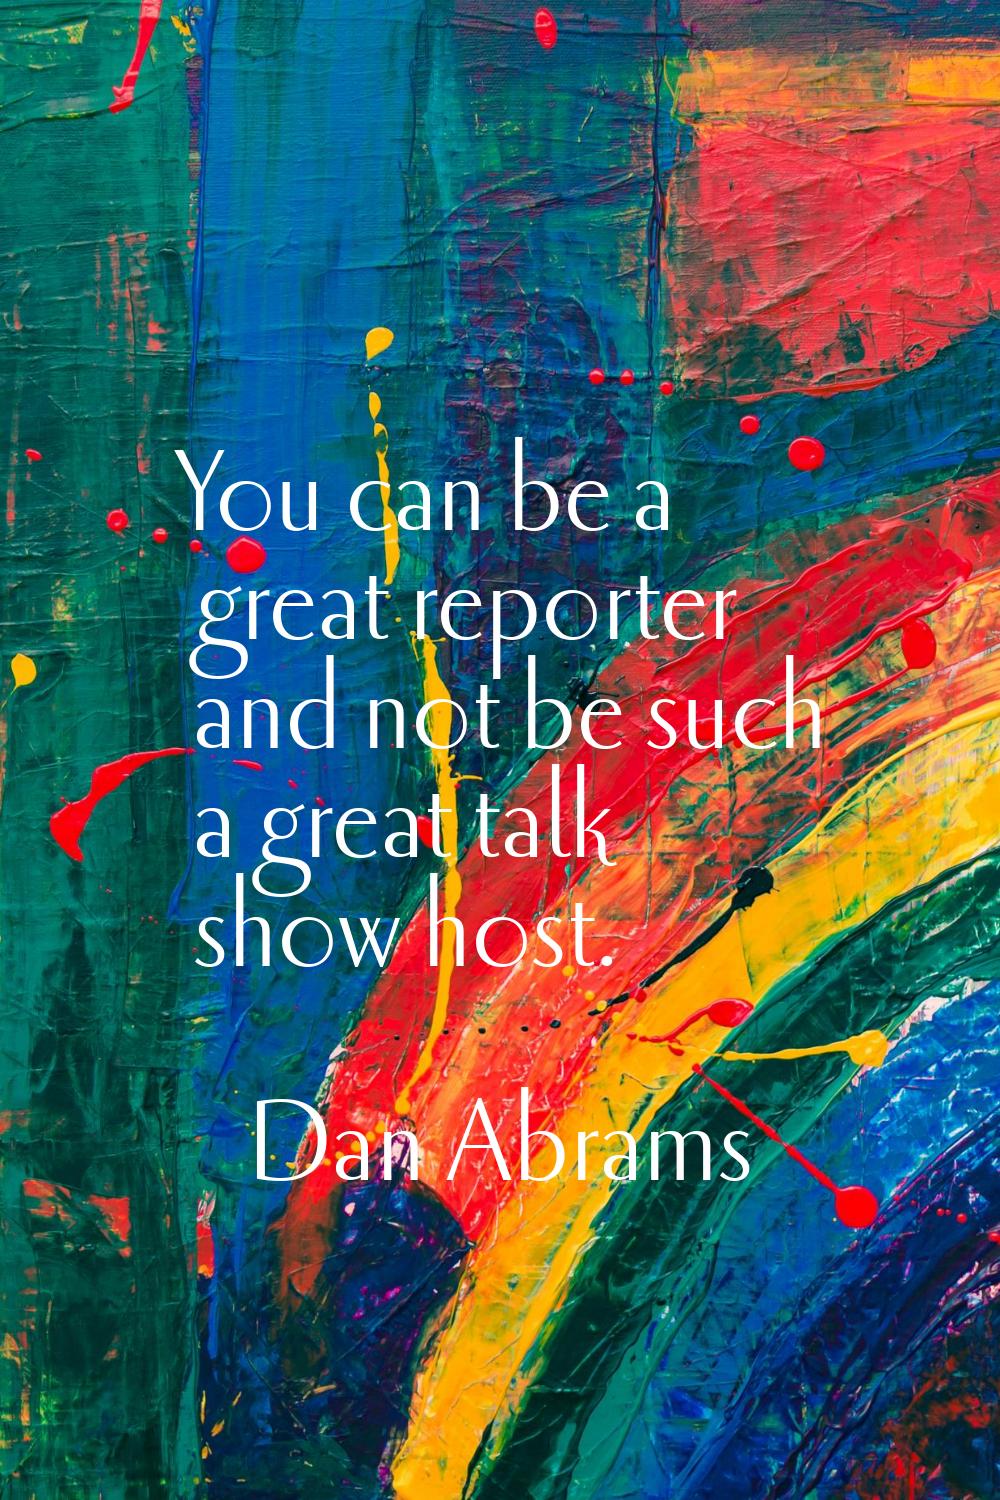 You can be a great reporter and not be such a great talk show host.